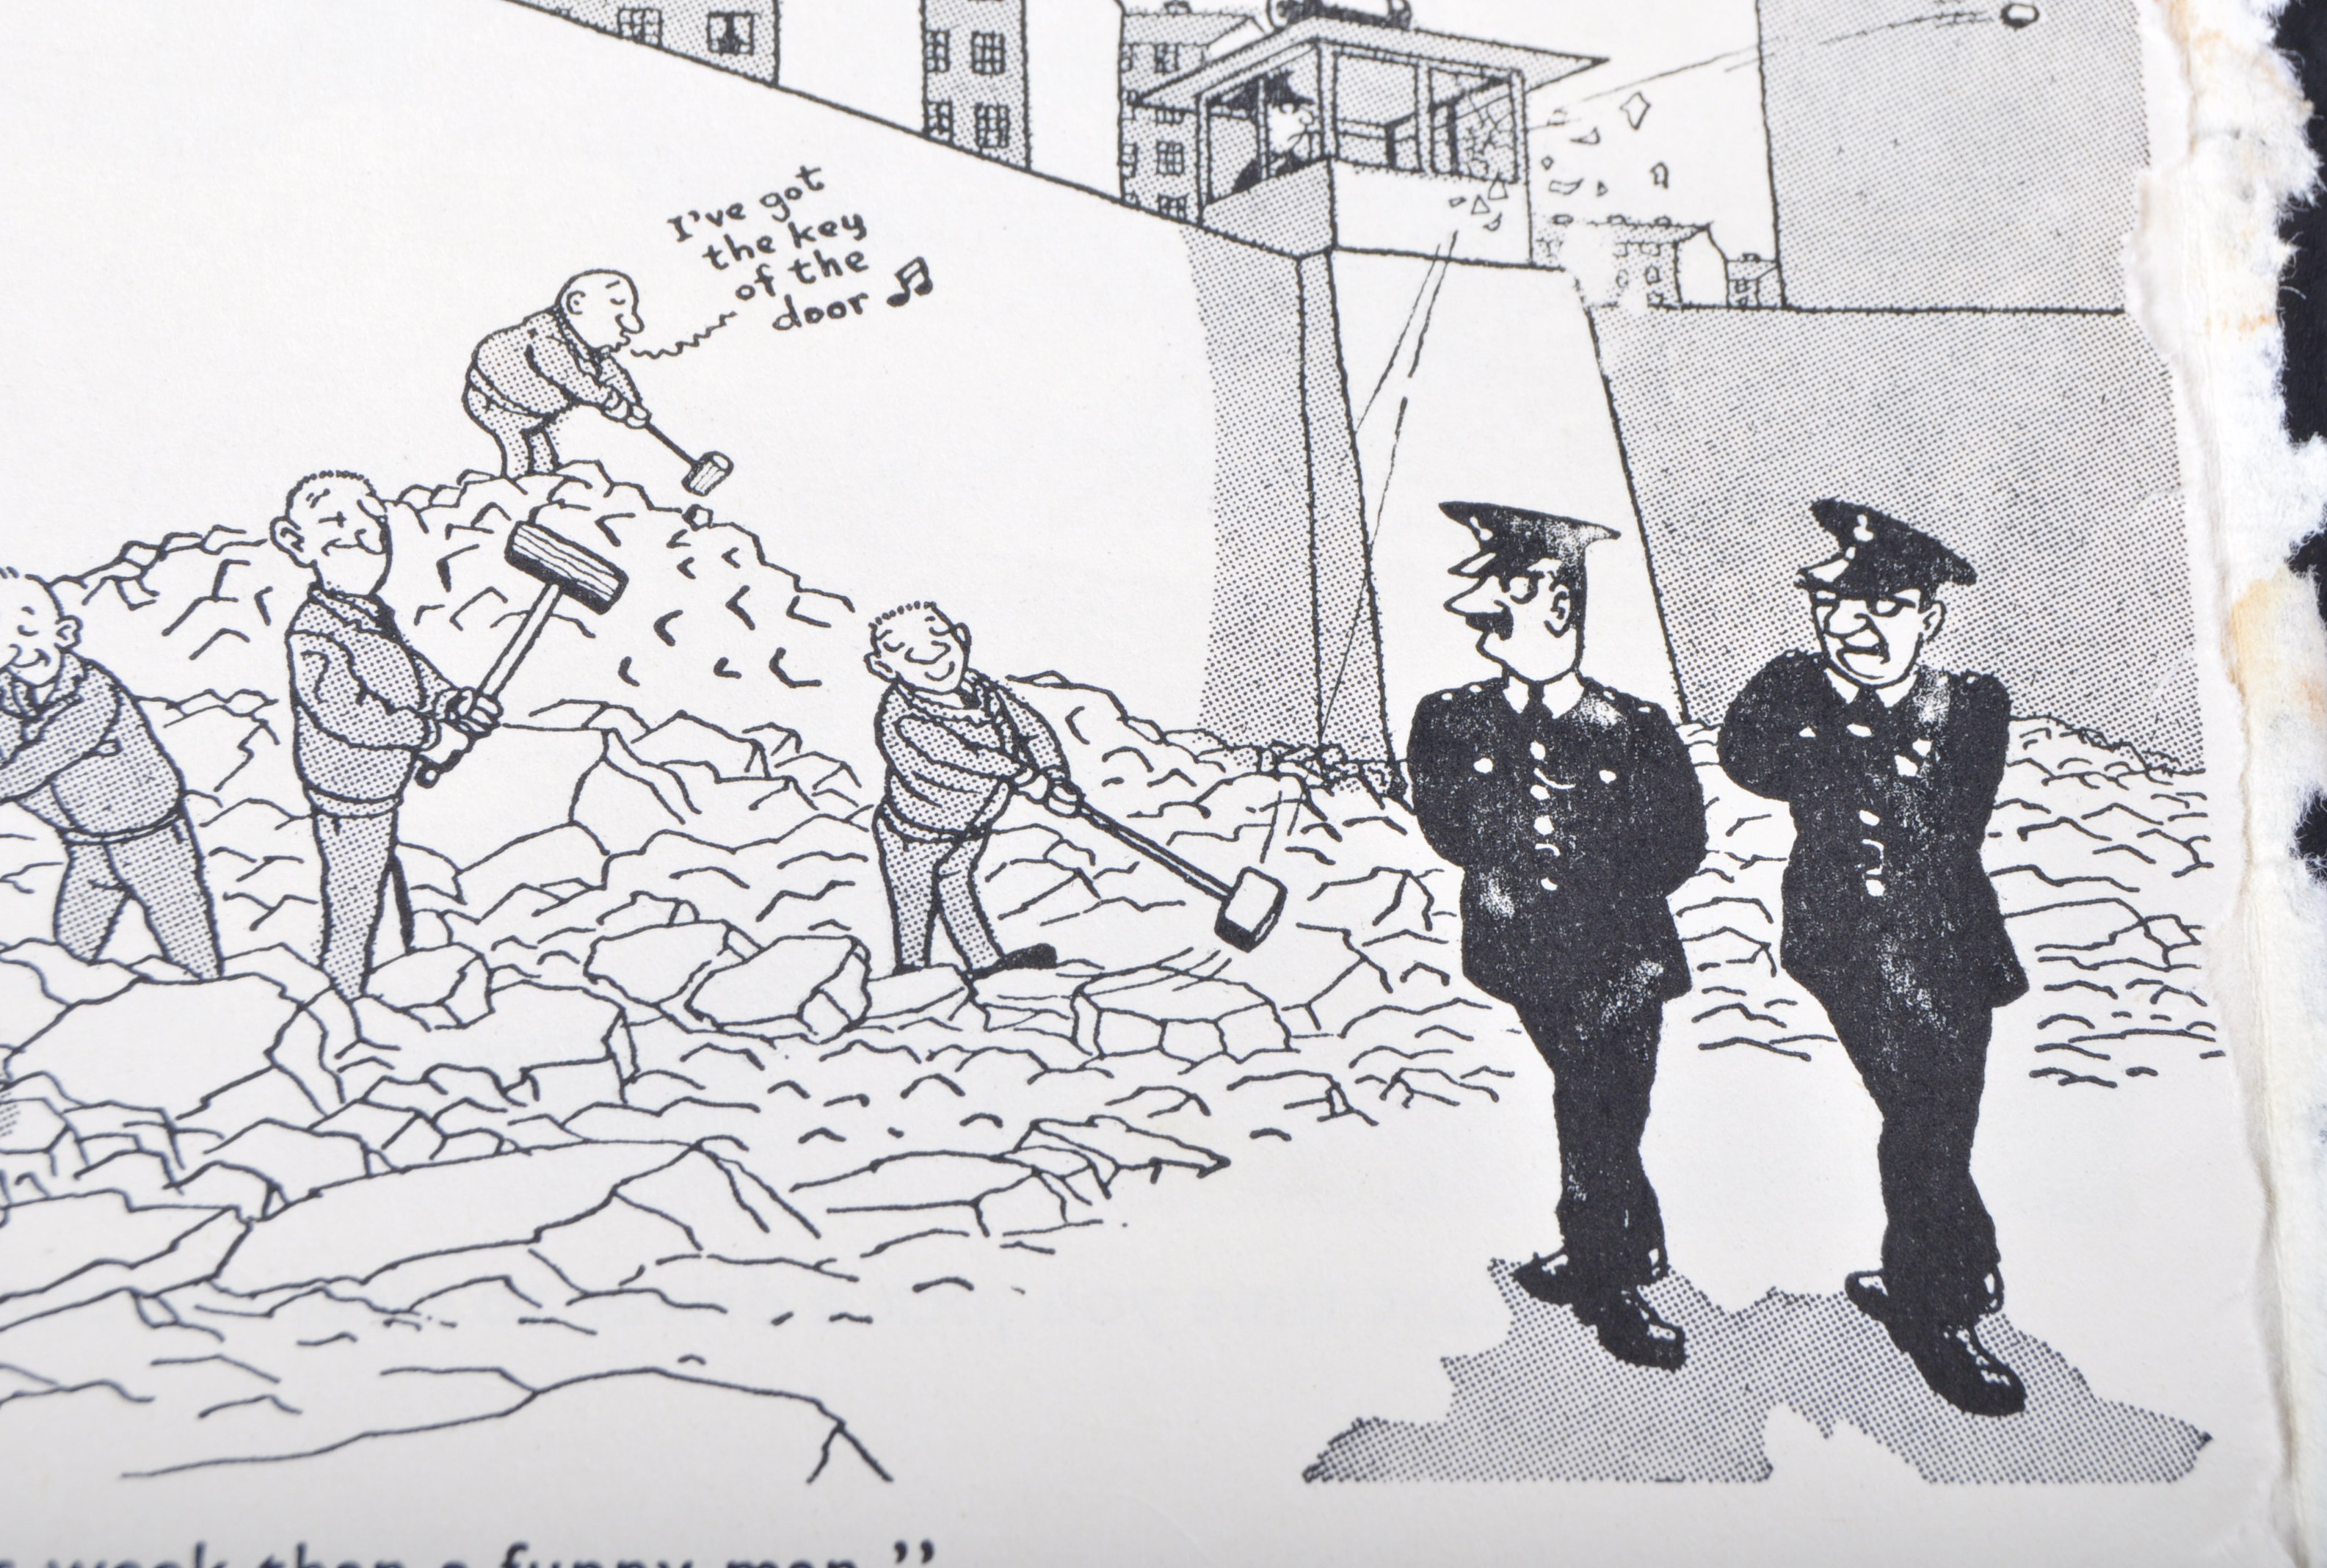 GREAT TRAIN ROBBERY - RONNIE BIGGS (1929-2013) - SIGNED GILES CARTOON - Image 3 of 4